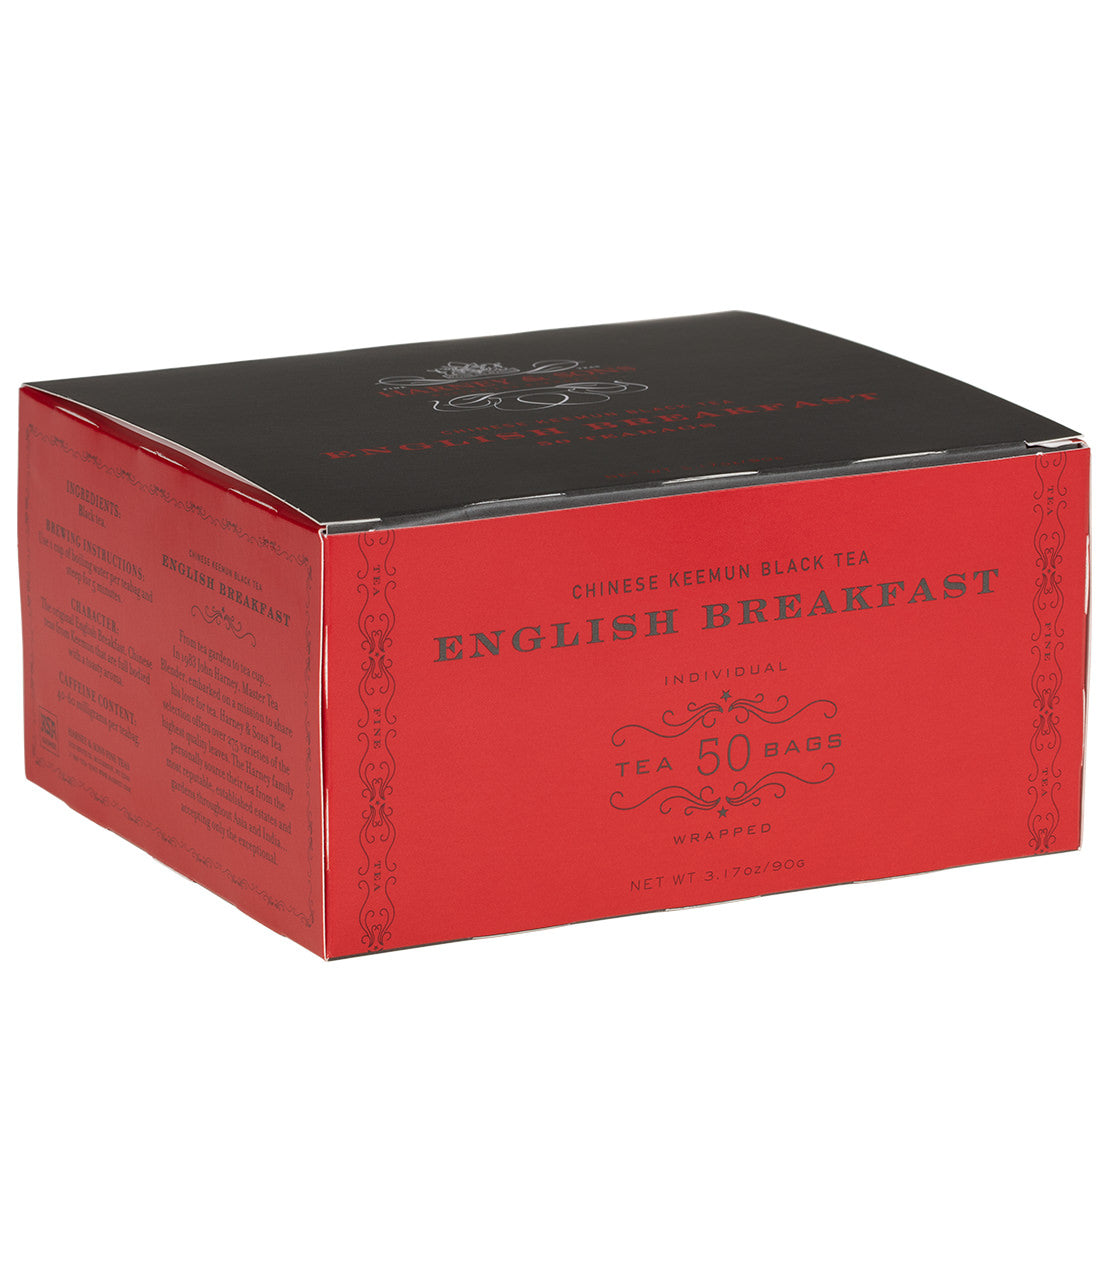 English Breakfast - Teabags 50 CT Foil Wrapped Teabags - Harney & Sons Fine Teas